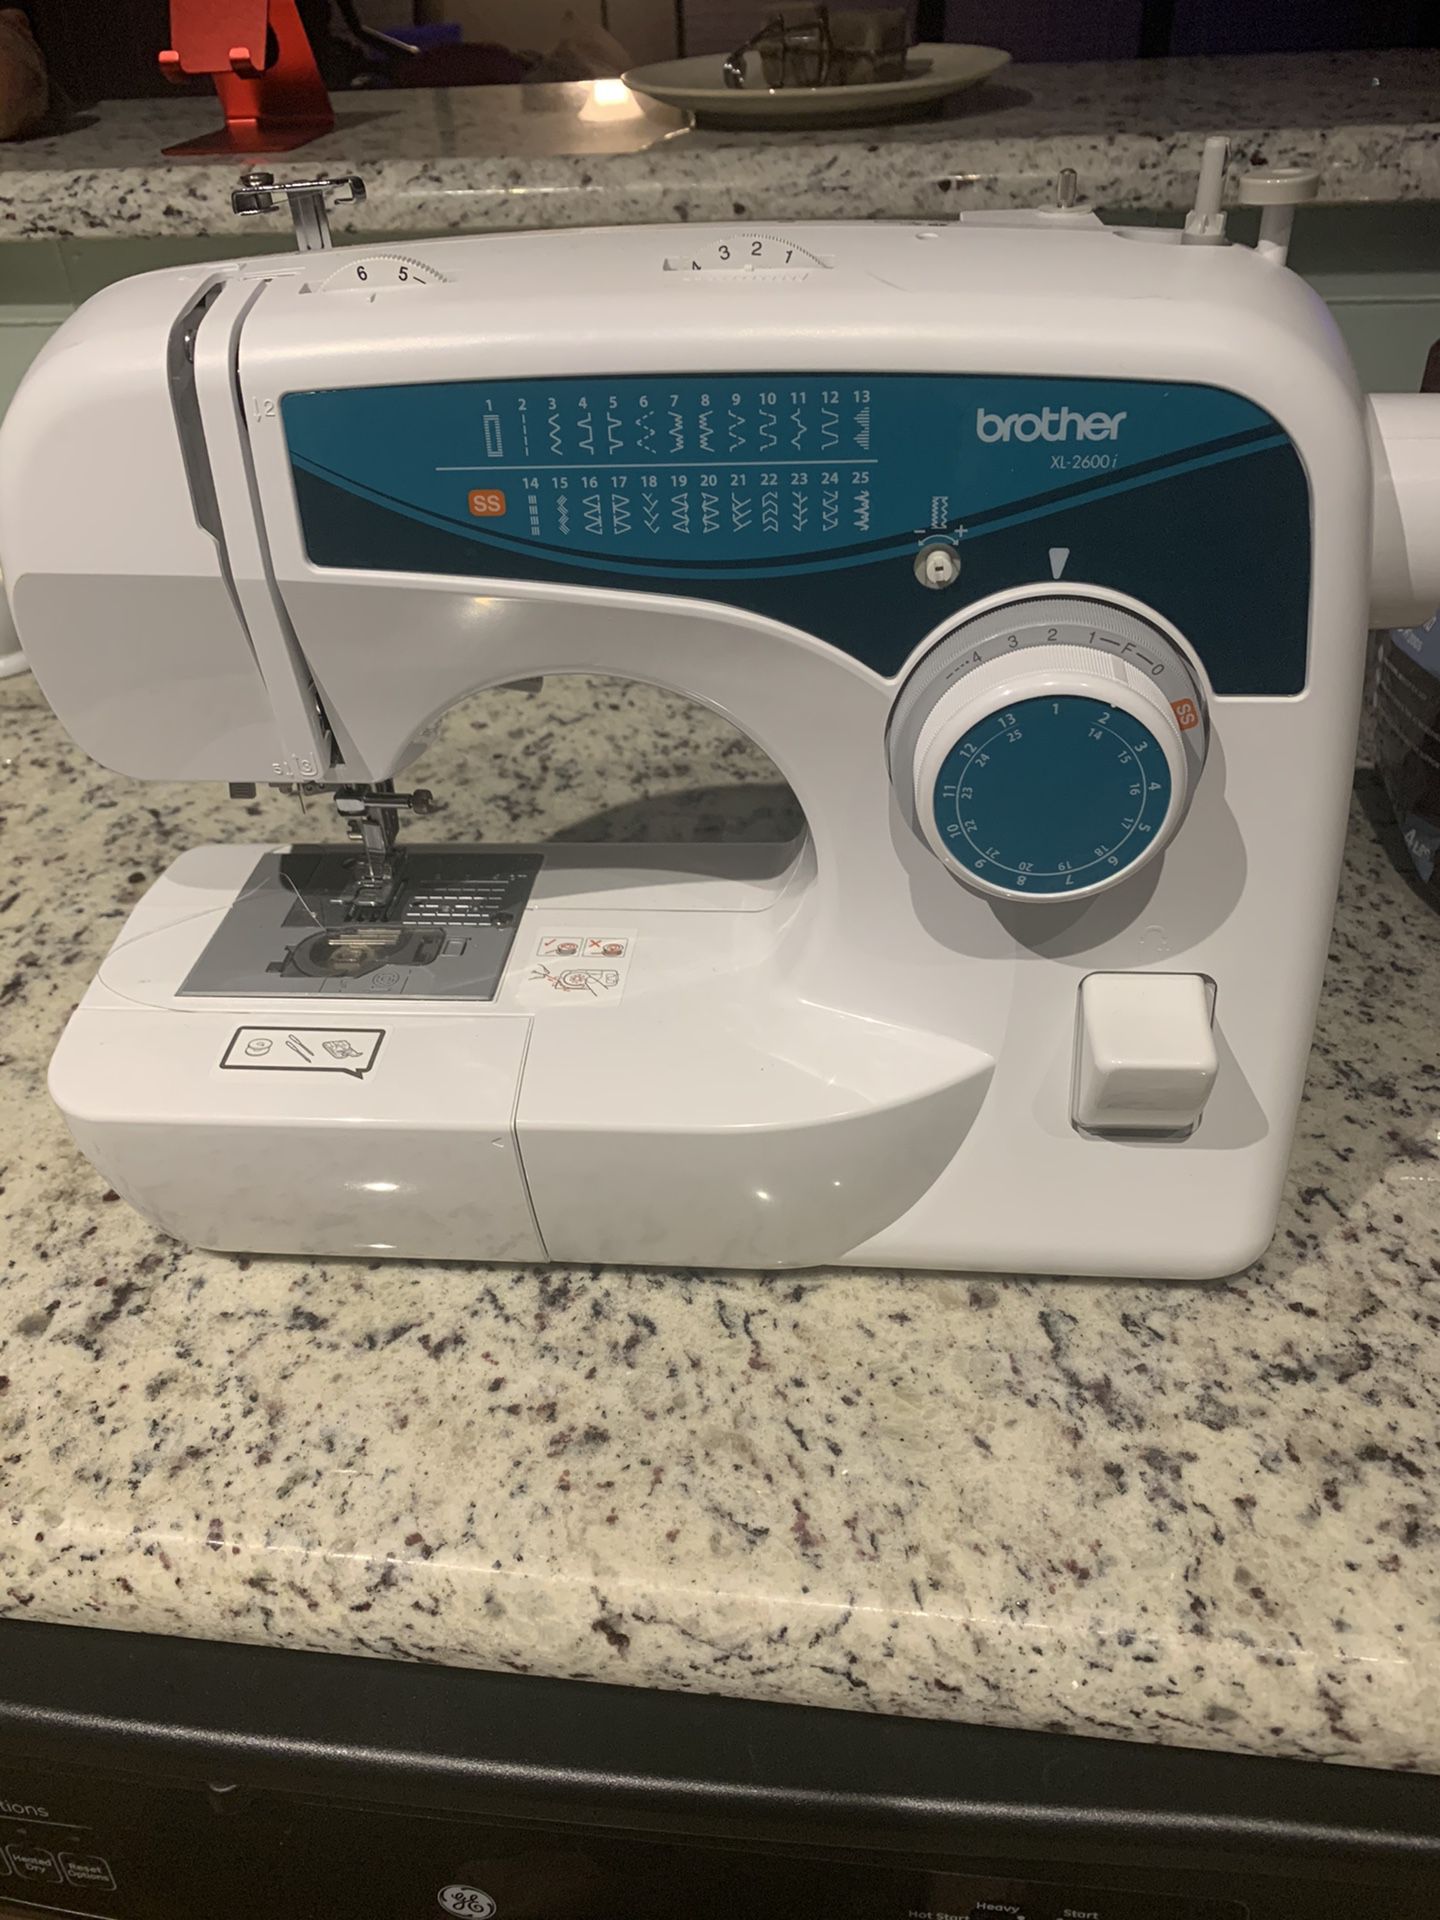 Brother sewing machine XL-2600i